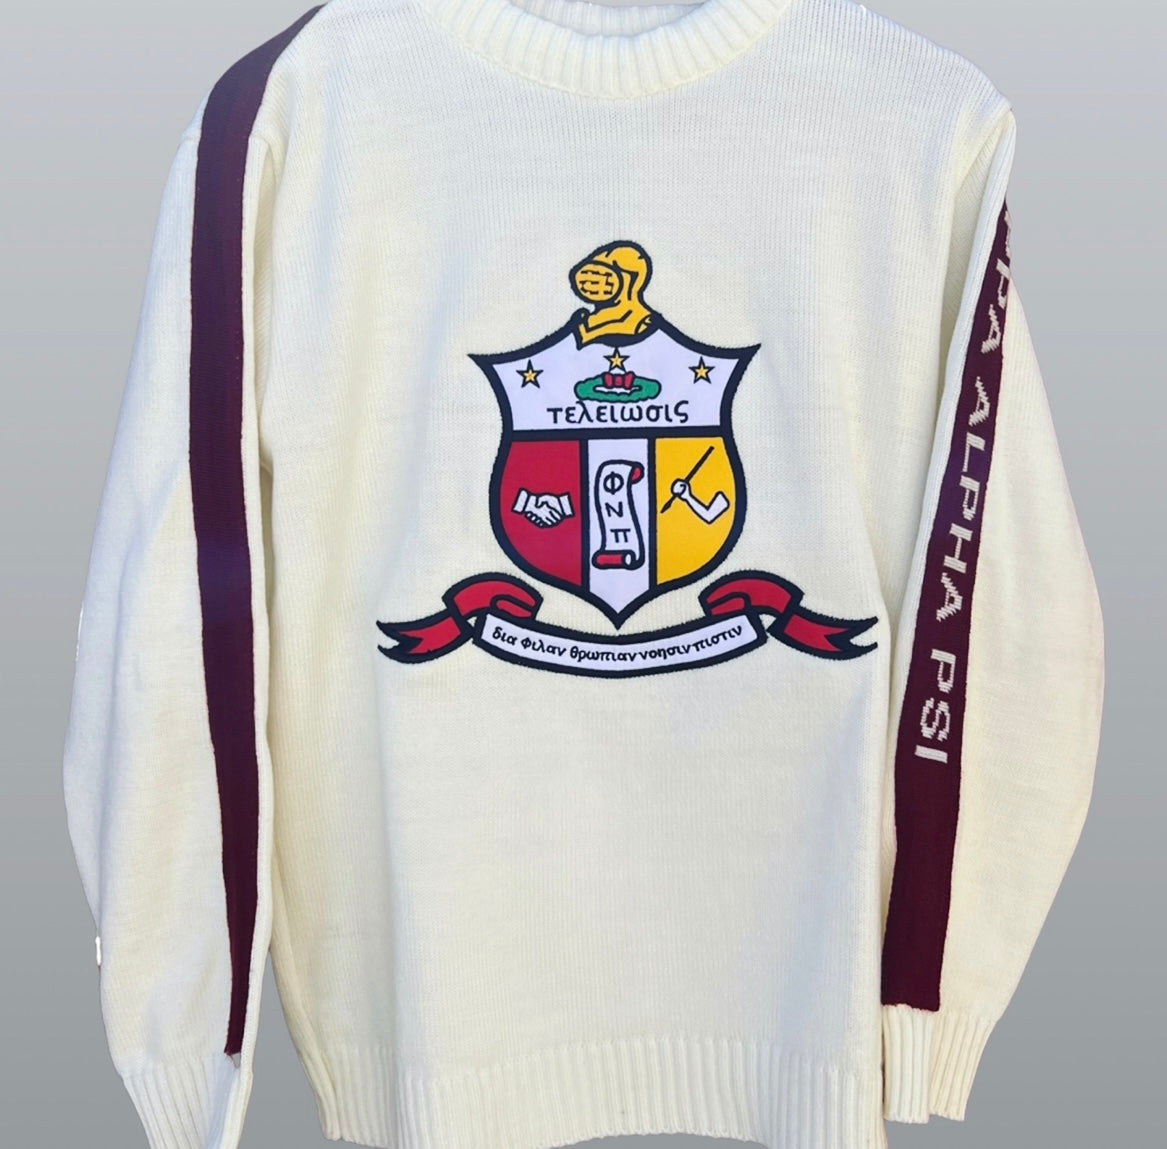 Exclusive Kappa Alpha Psi Double Stitched Appliqué Embroidery Crimson Sweater. This is the perfect long-sleeved Sweater to wear while showing off your Kappa Alpha Psi fraternity . A comfortable 100% Acrylic with a twill embroidery across the chest give you the perfect fit. This sweater is also a perfect gift for your favorite Kappa Man.